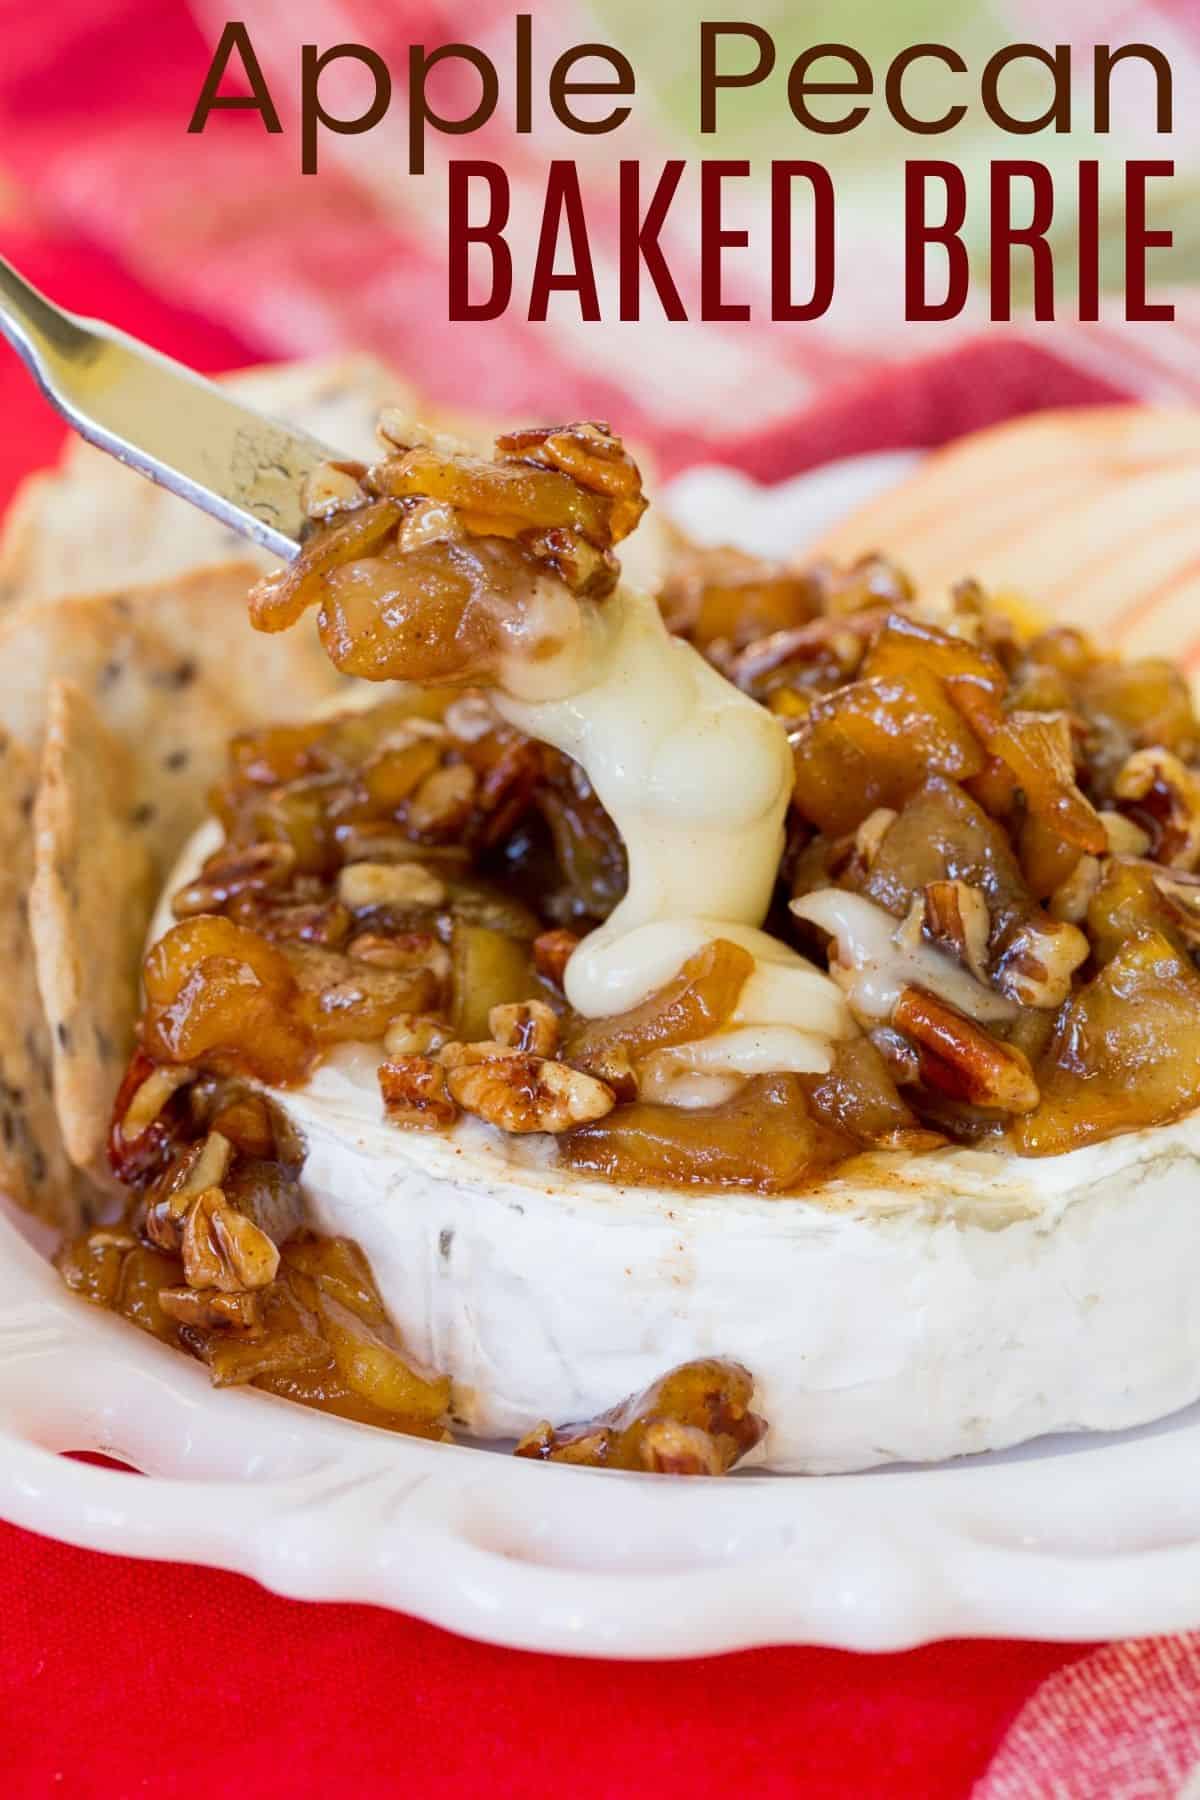 A wheel of baked brie cheese in the foreground topped with a caramelized apple pecan topping, with a bottle of sparkling cider in the background